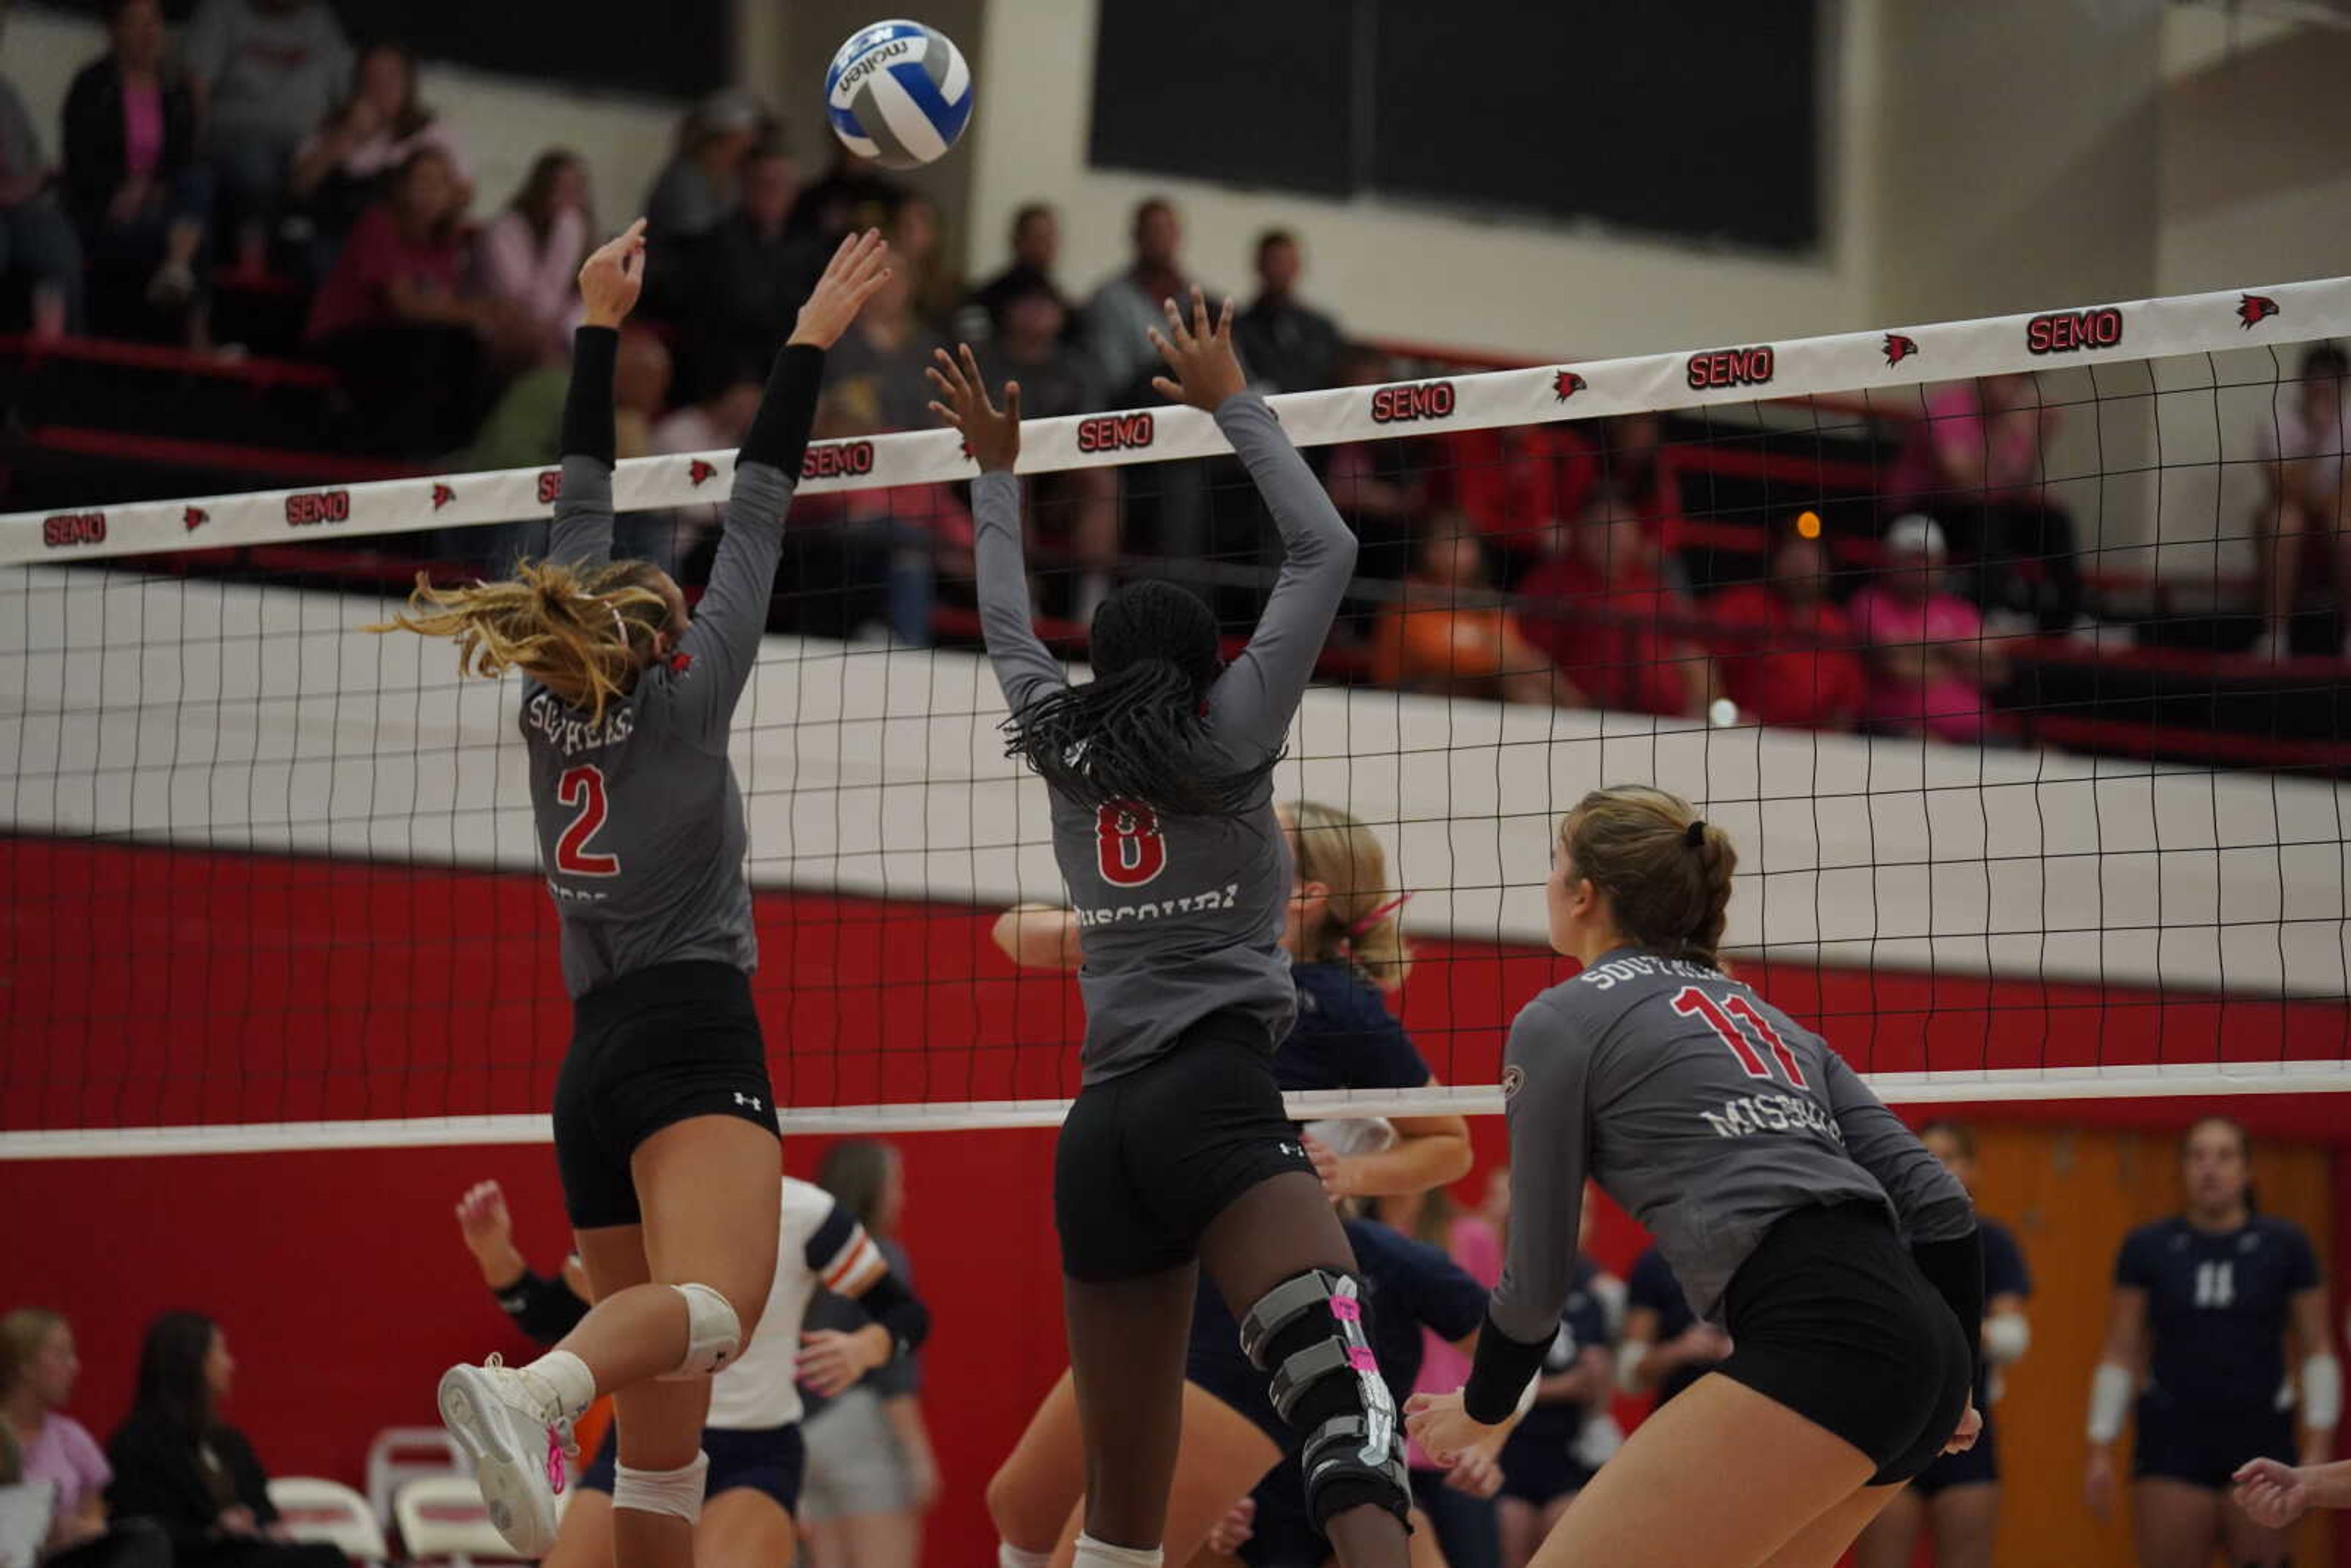 SEMO freshman outside hitter Lucy Arndt (2) and graduate student middle blocker Talia Gouard (8) go up for a block, while redshirt senior rightside hitter Kaelyn O’Brien watches against UT-Martin on October 6th at Houck Field House.  The Redhawks would win the match in three straight sets.